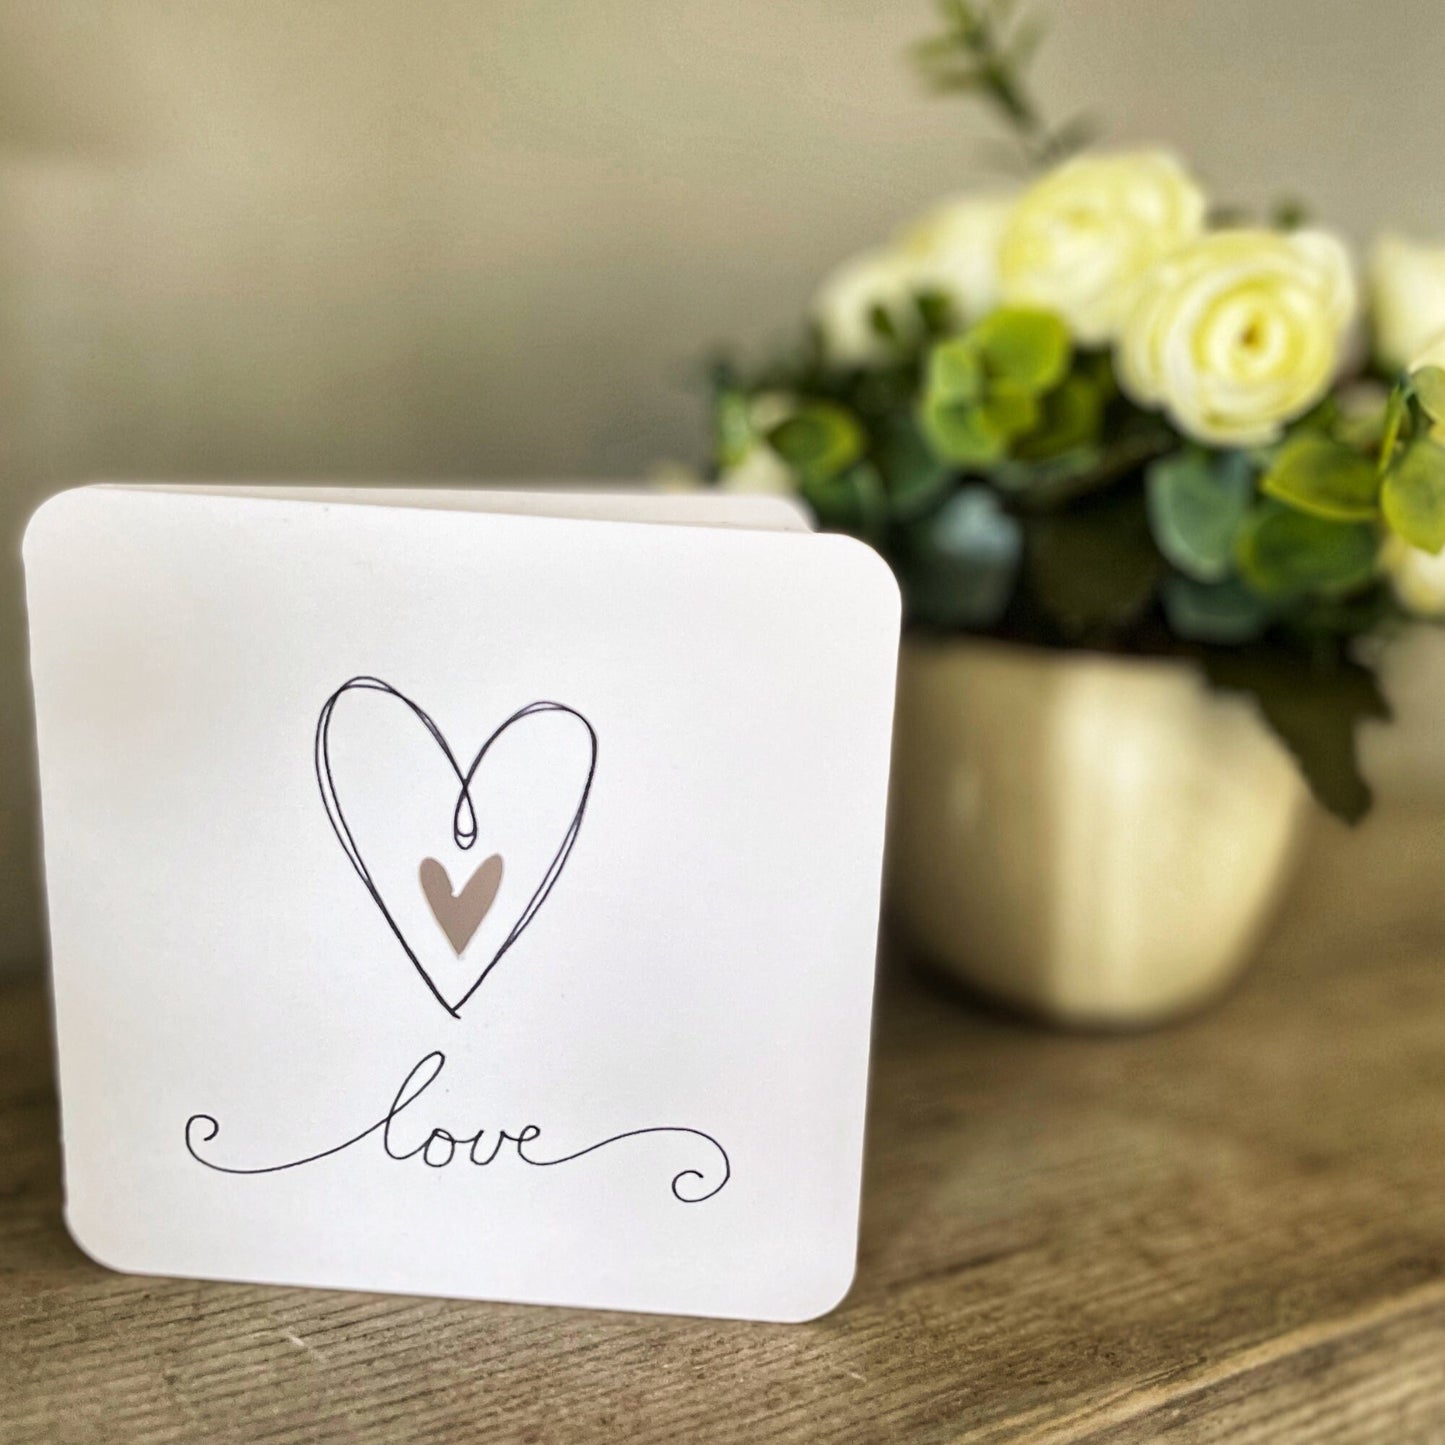 Elegant Cut Out Love Heart Anniversary Card For Wife